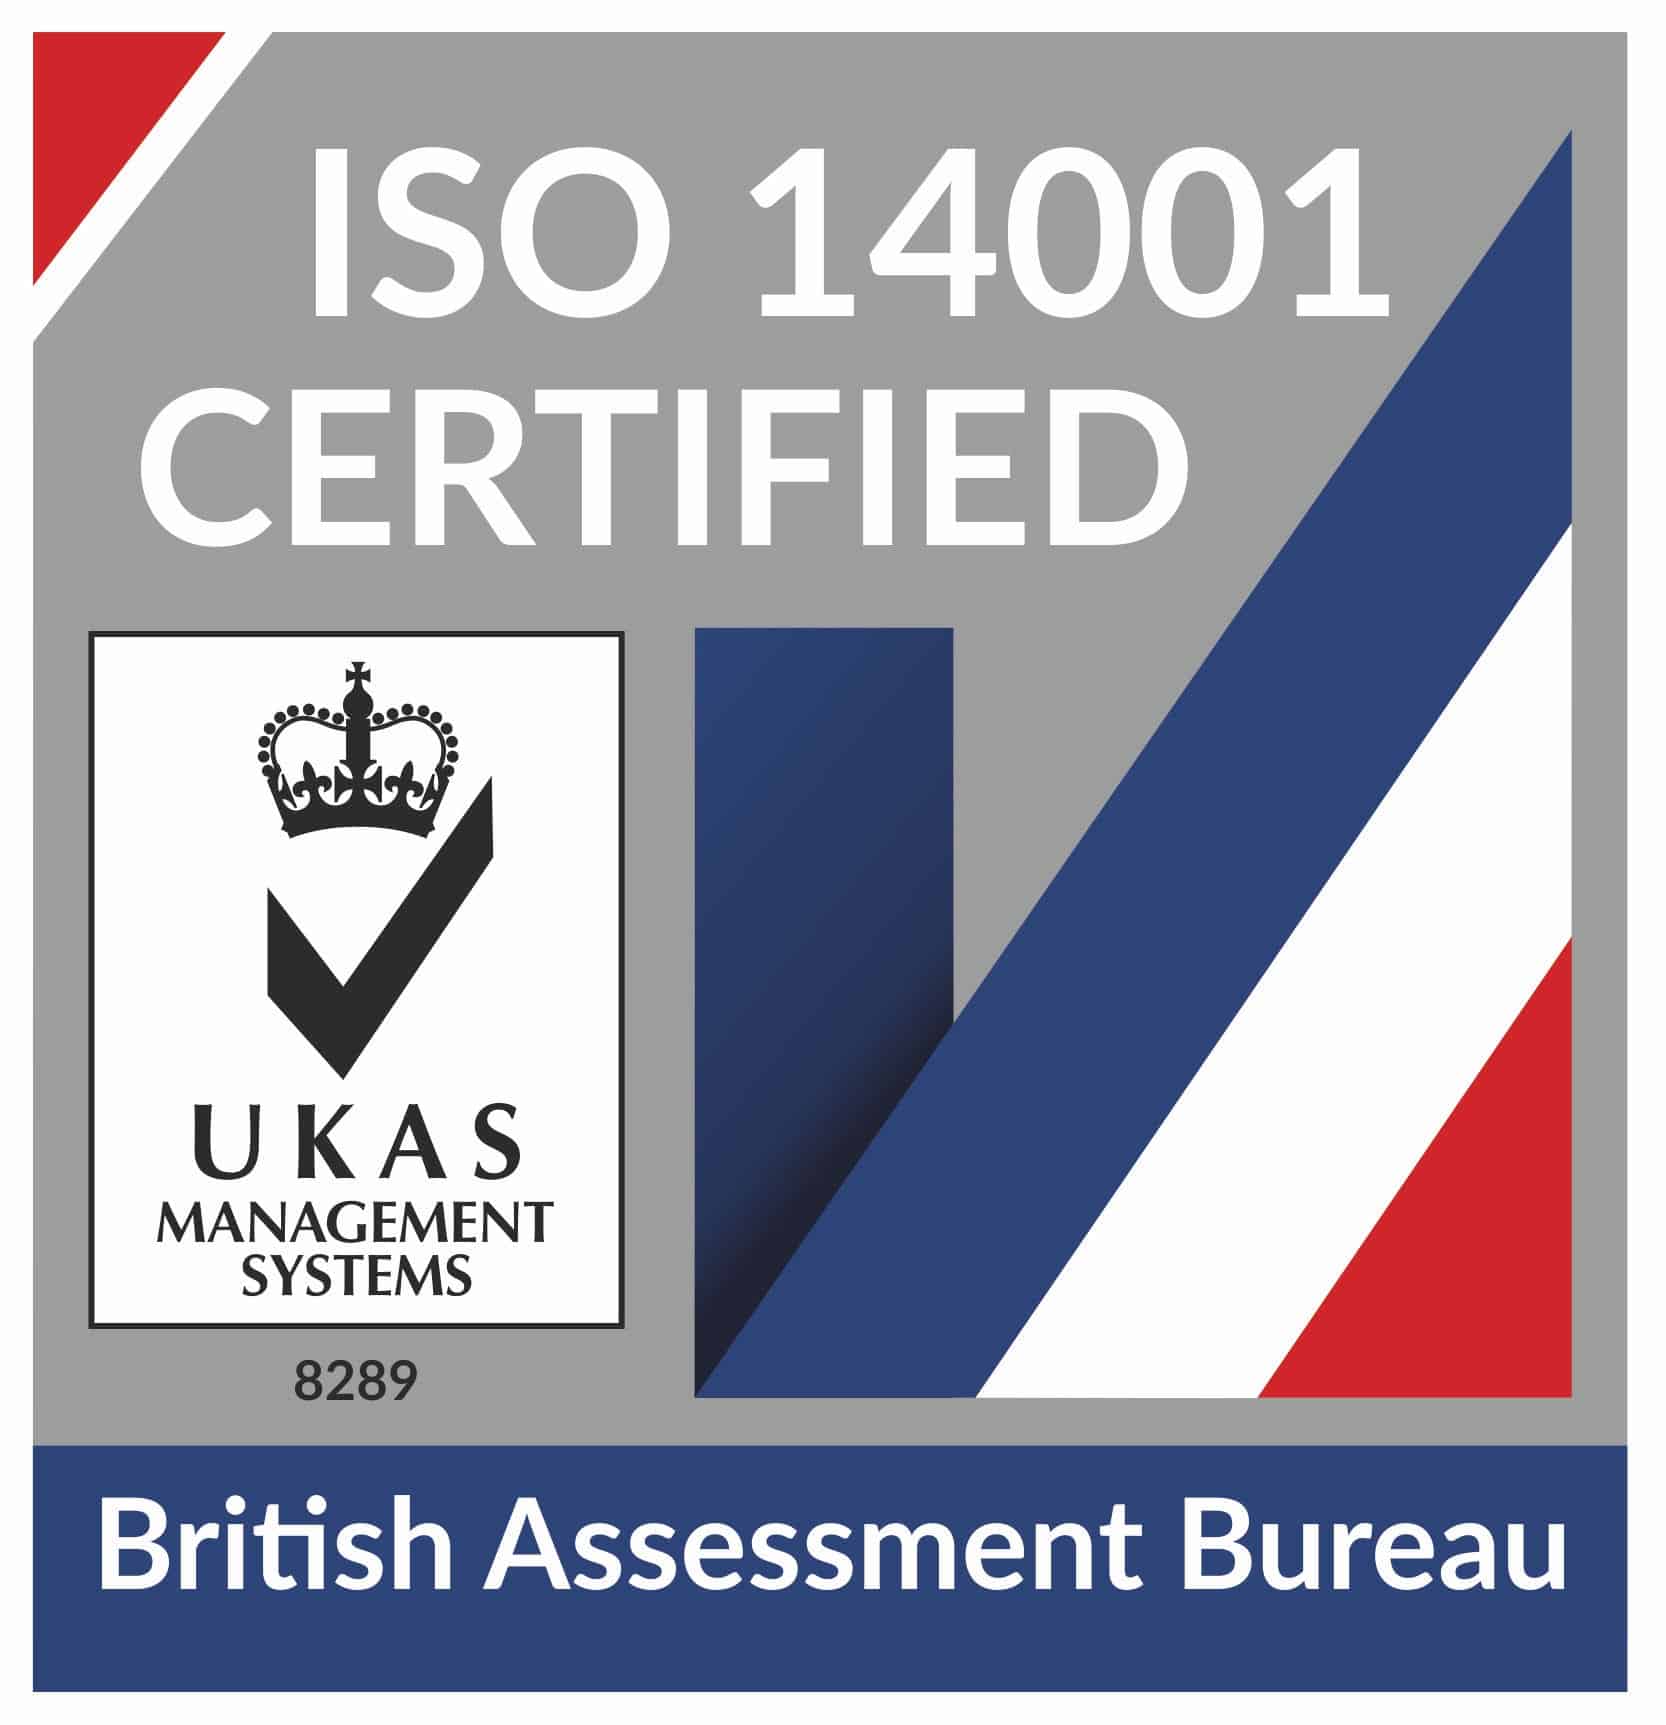 ISO-14001-Certification-Badge-with-UKAS-Mark